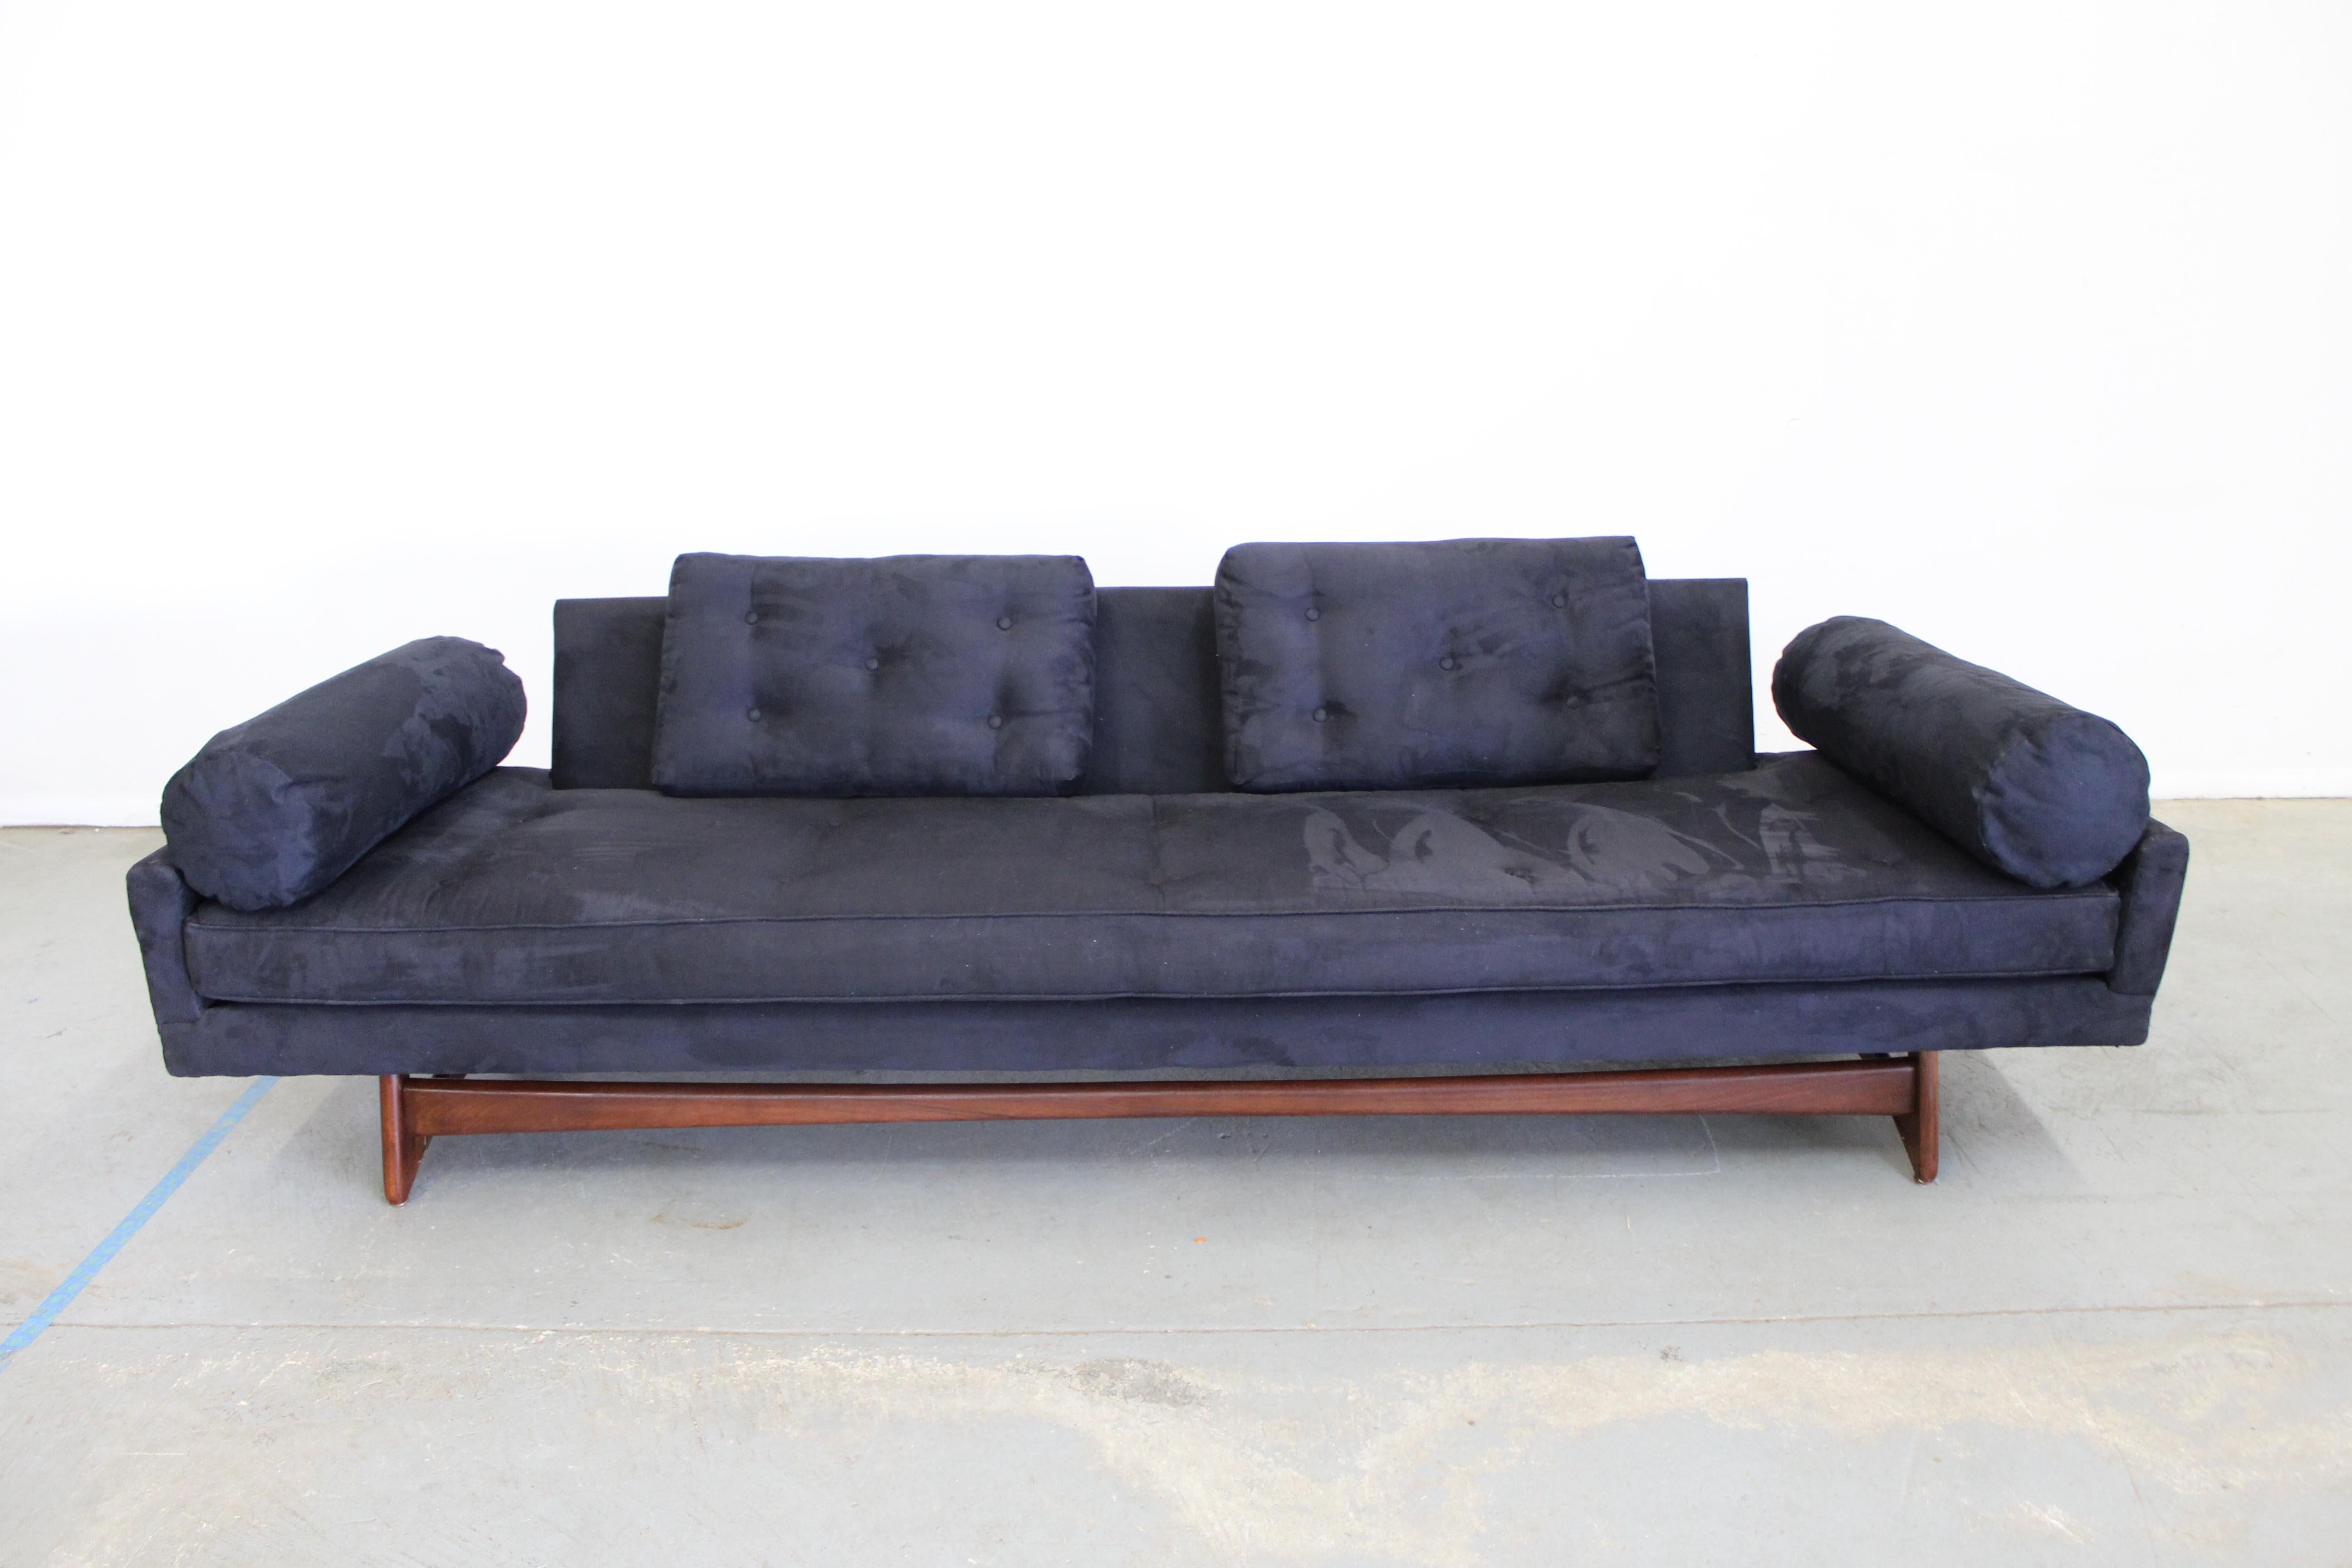 What a find. Offered is a beautiful Mid-Century Modern sofa (model 2408), designed by Adrian Pearsall for Craft Associates. Features beautifully sculpted wood legs with two back cushions and has been reupholstered by its previous owner with black